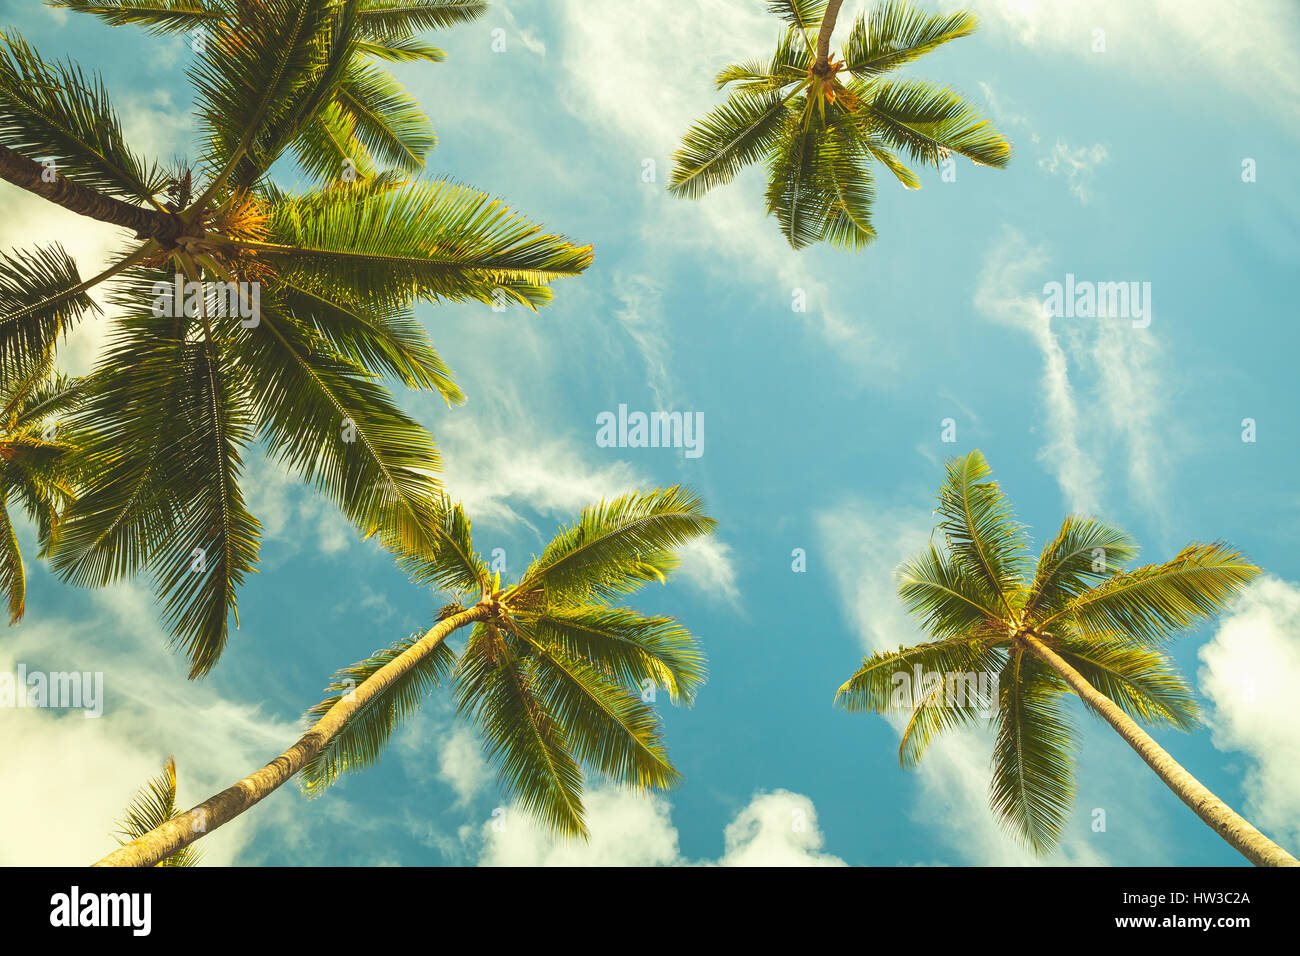 Coconut palm trees in cloudy sky. Vintage stylized photo with tonal correction filter effect Stock Photo